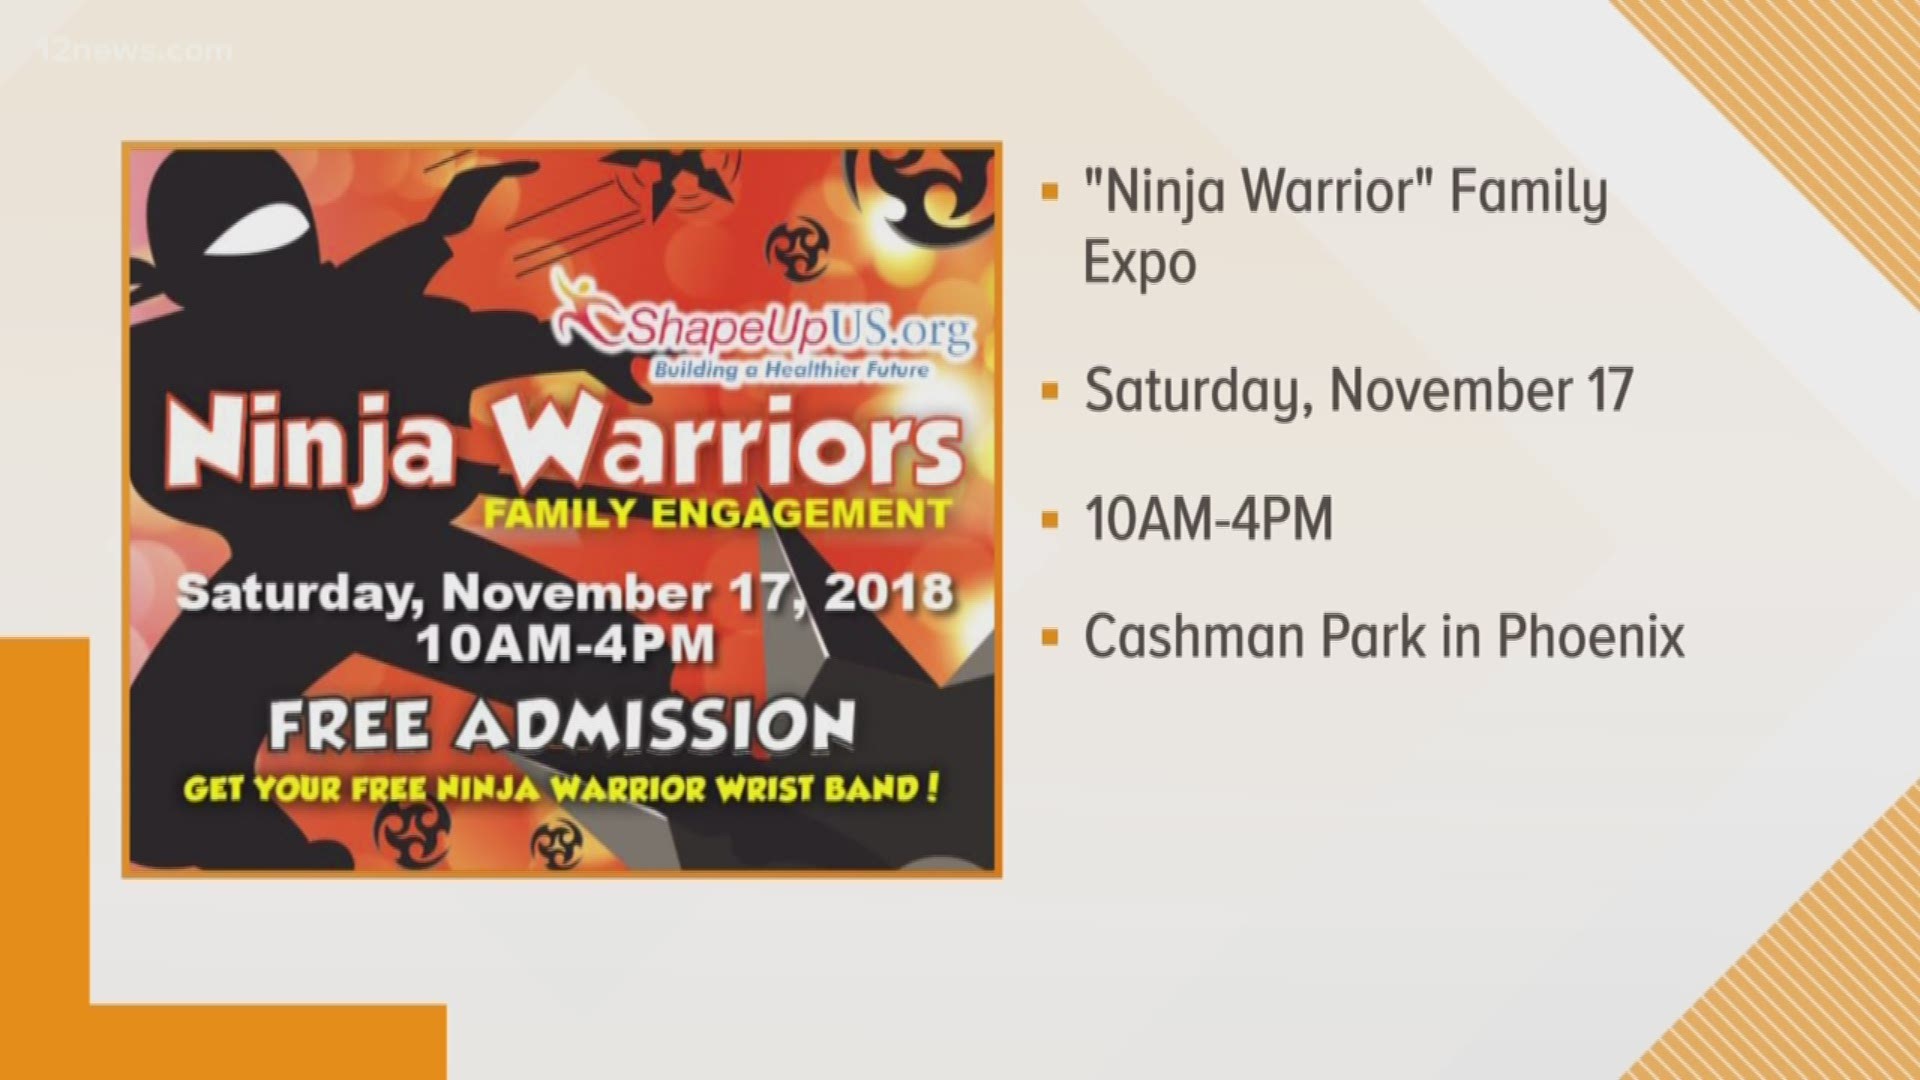 There's a free ninja warrior family expo happening this week at Cashman Park in Phoenix.